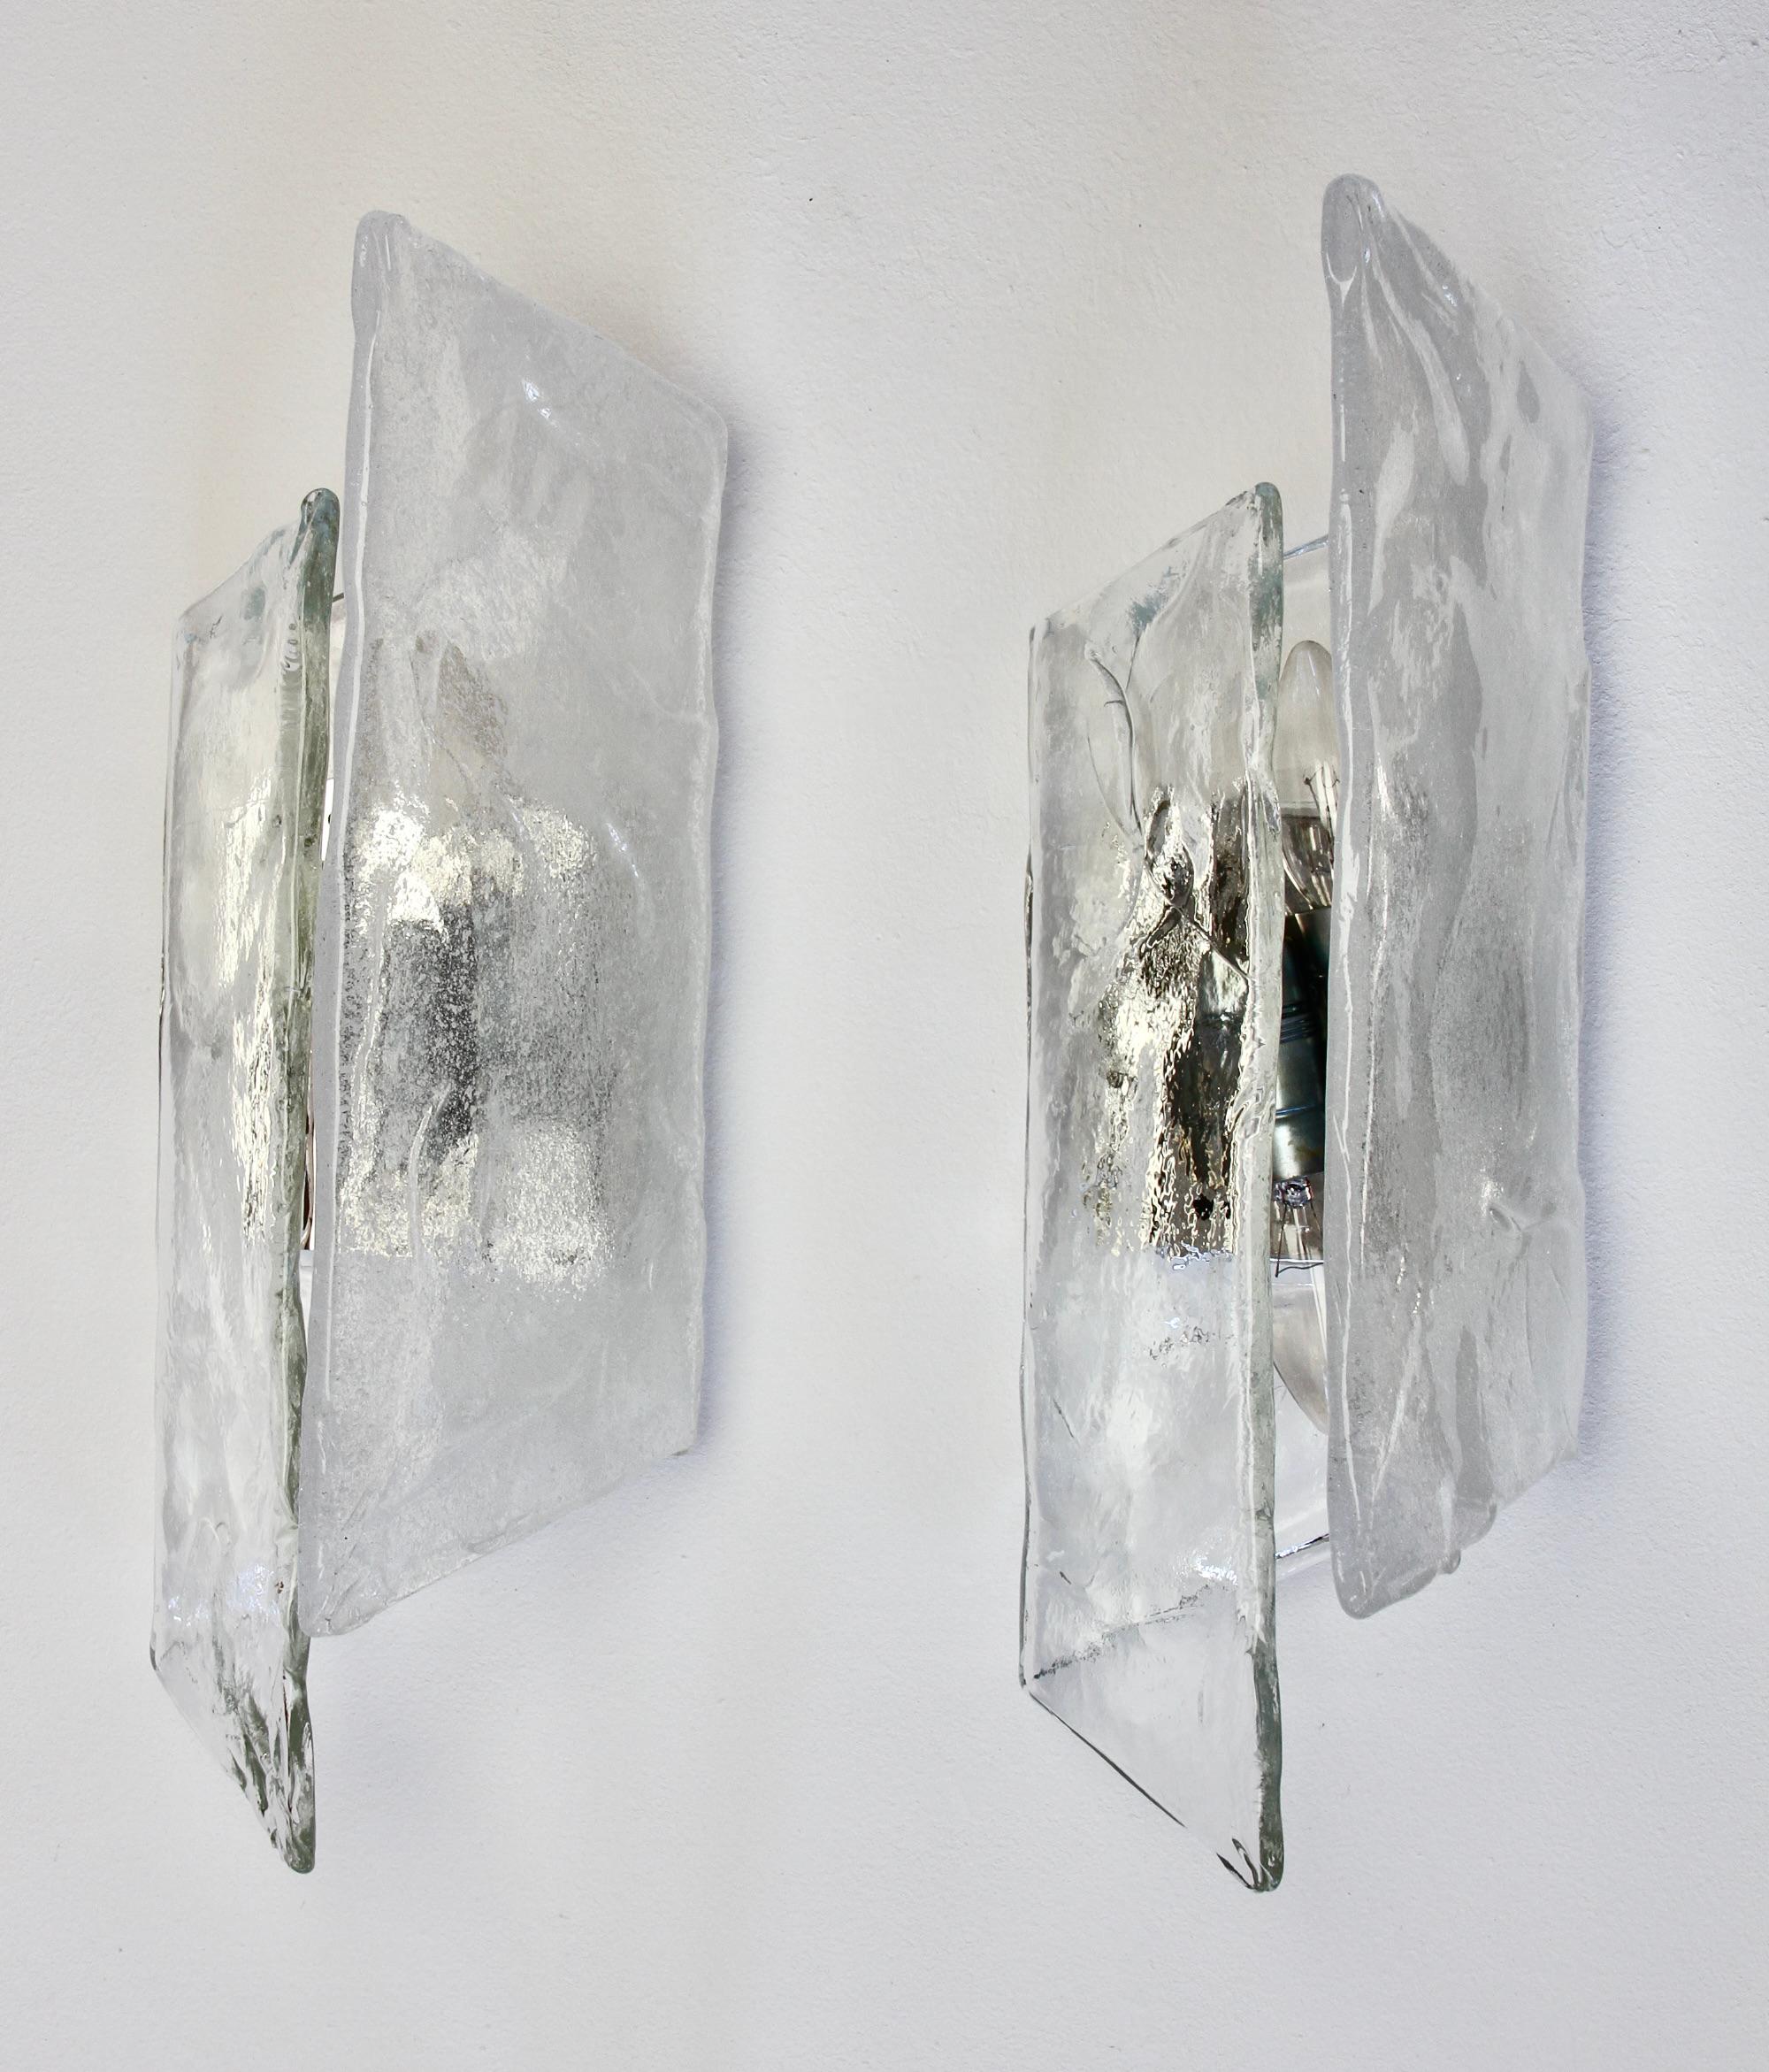 Rare vintage midcentury pair of polished steel, white and clear Murano glass wall lamps, lights or sconces by Murano glass Italian designer Carlo Nason for the famous Austrian lighting manufacturer Kalmar, circa late 1970s. Each light features a